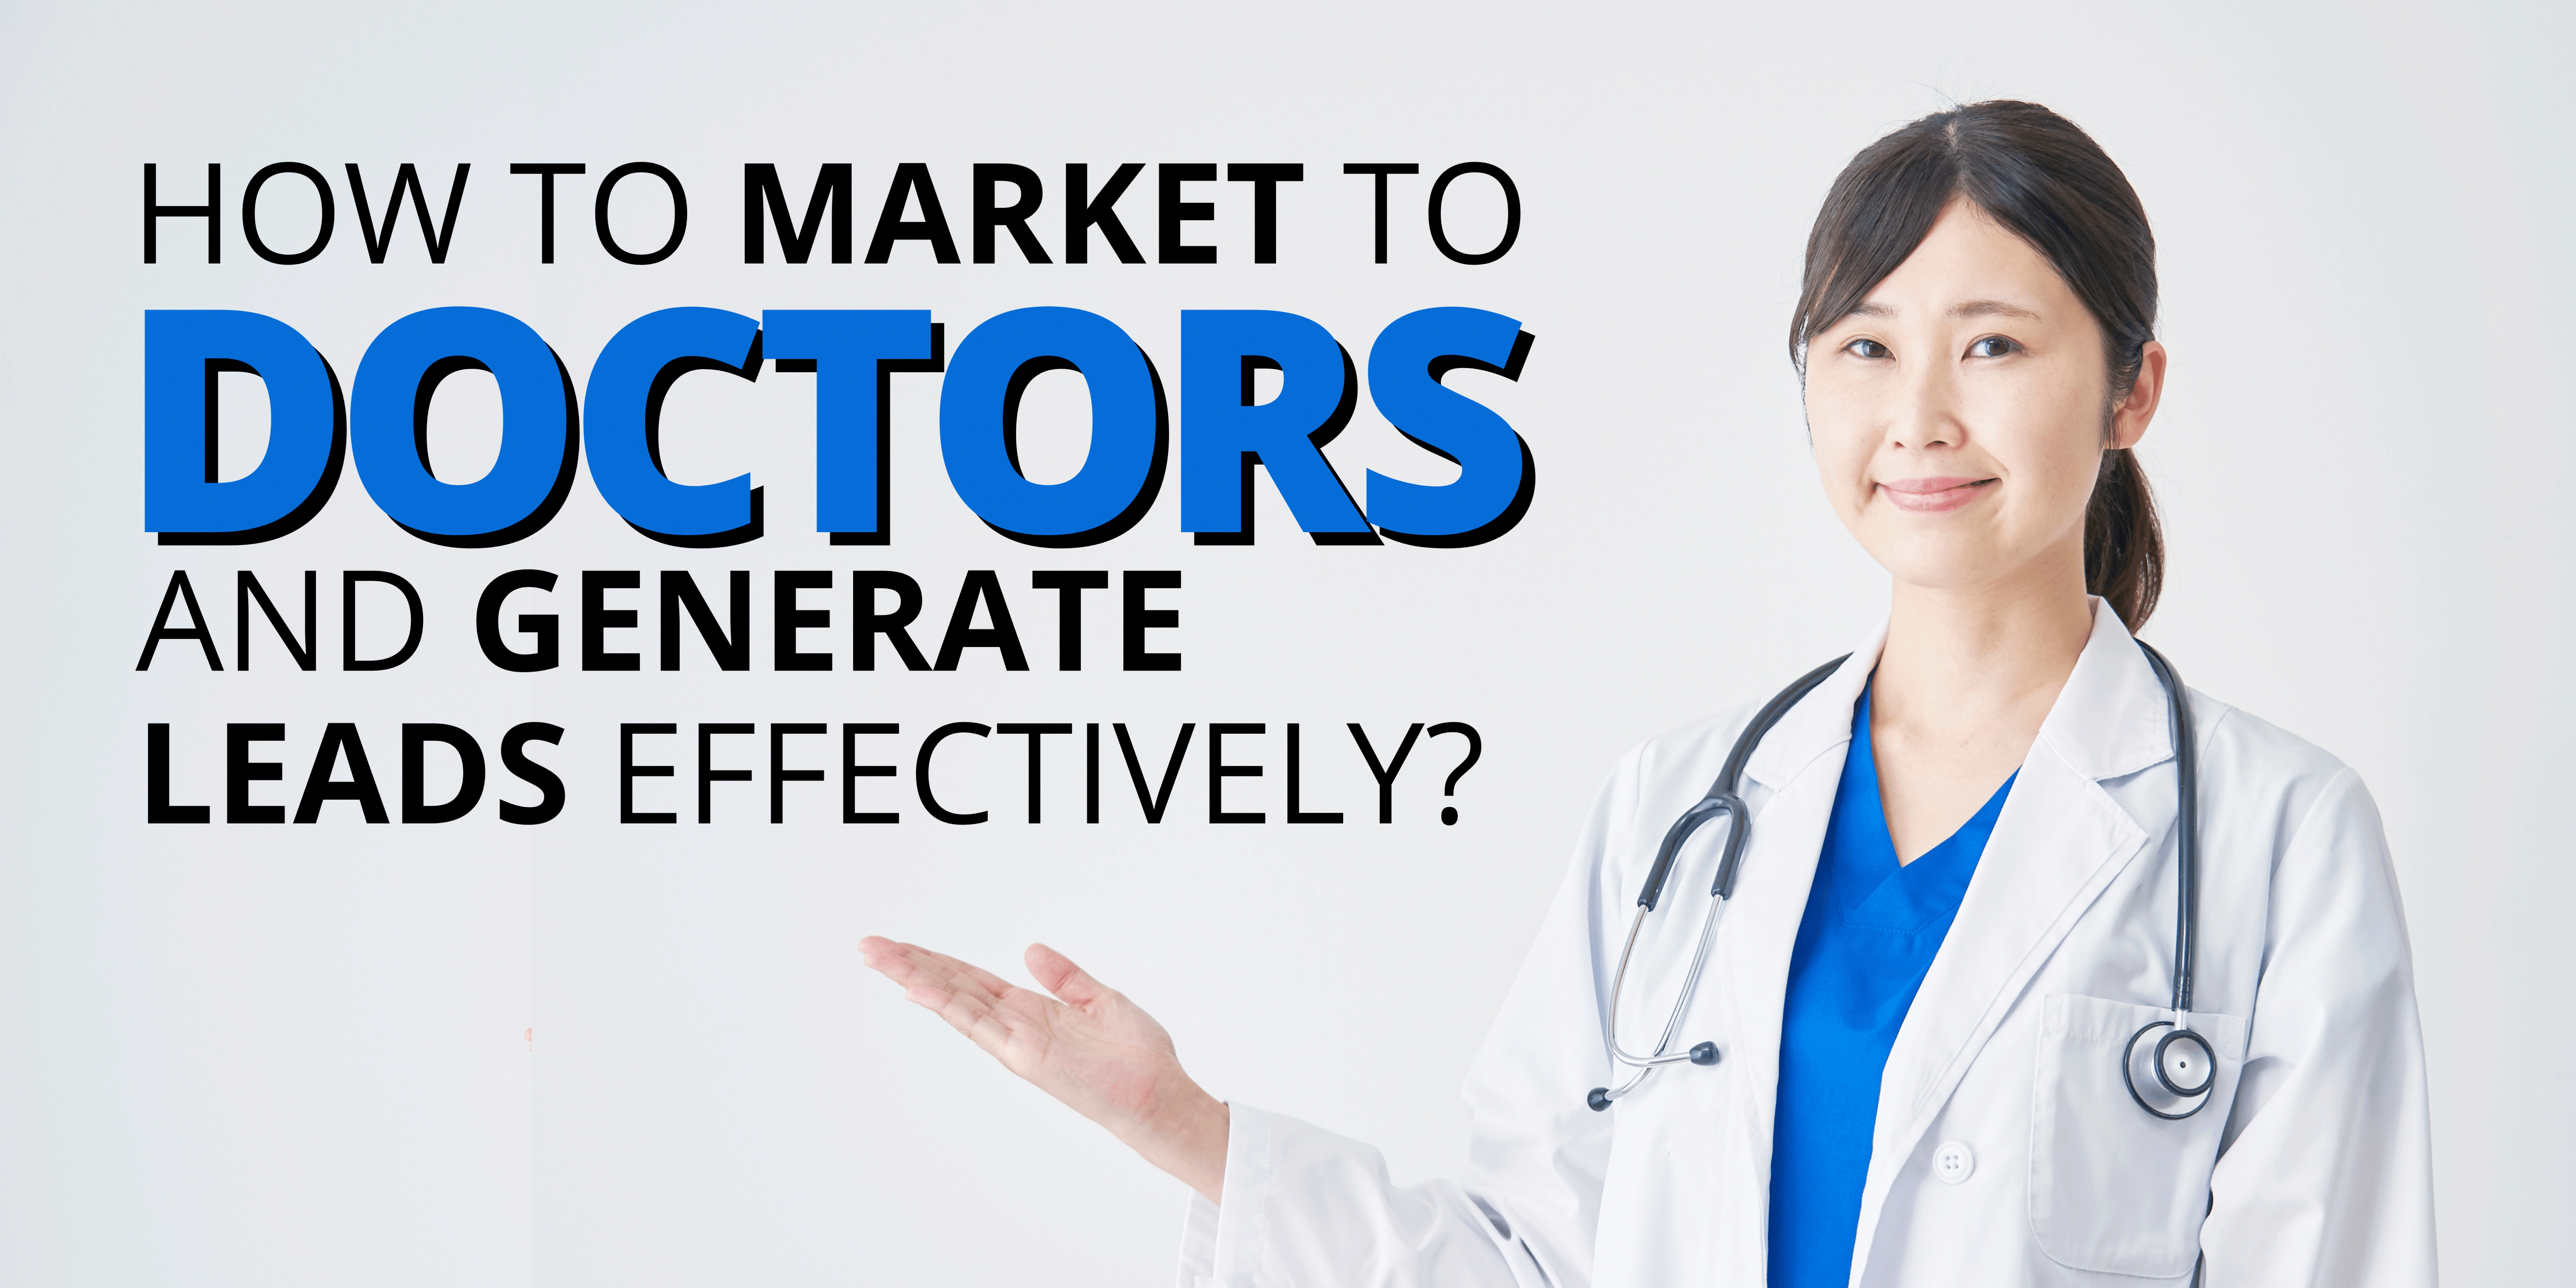 How to Market to Doctors